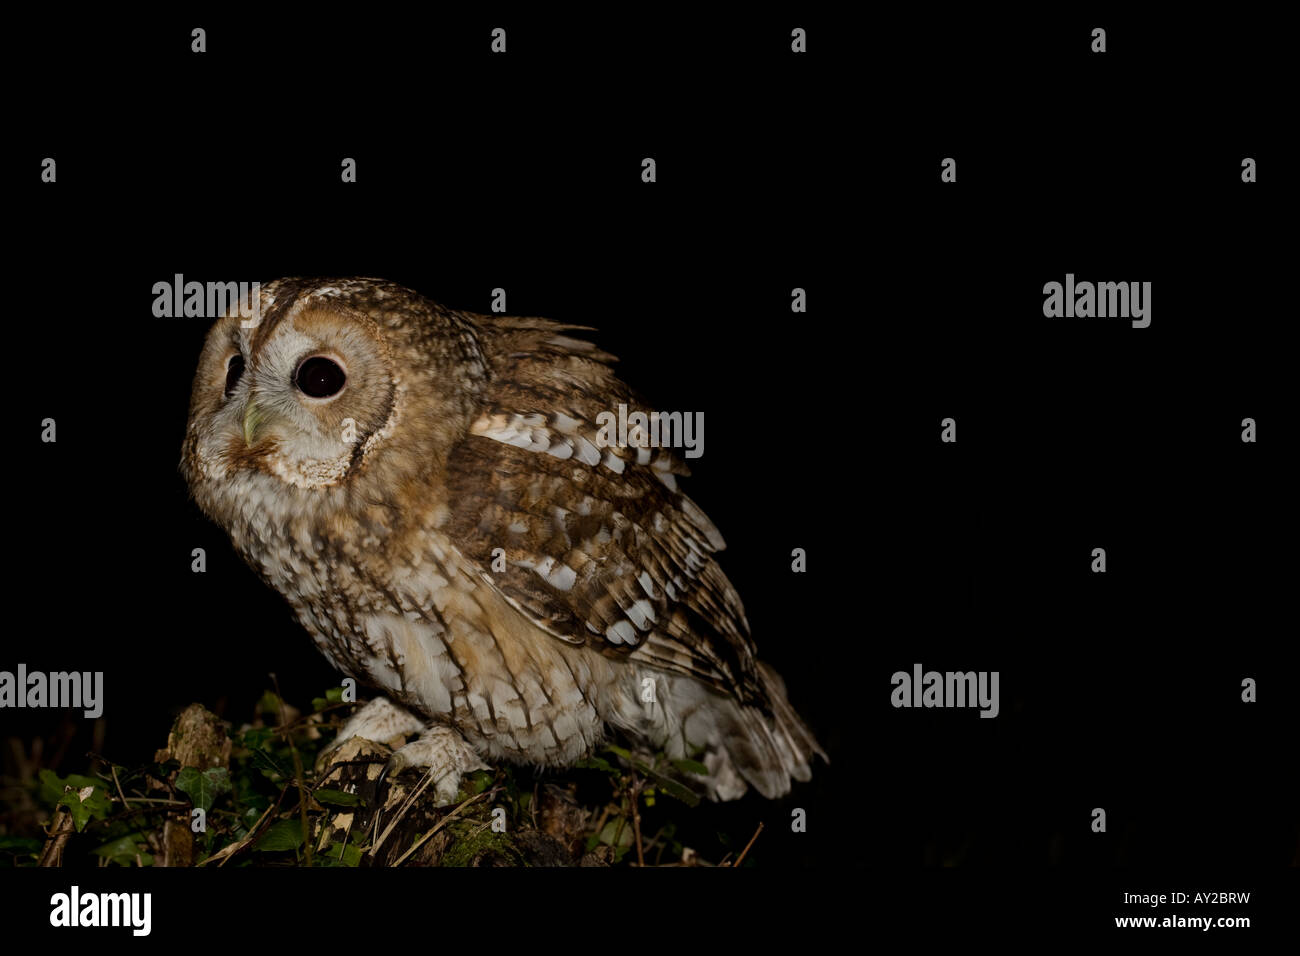 Tawny owl looking into the distance at night Stock Photo